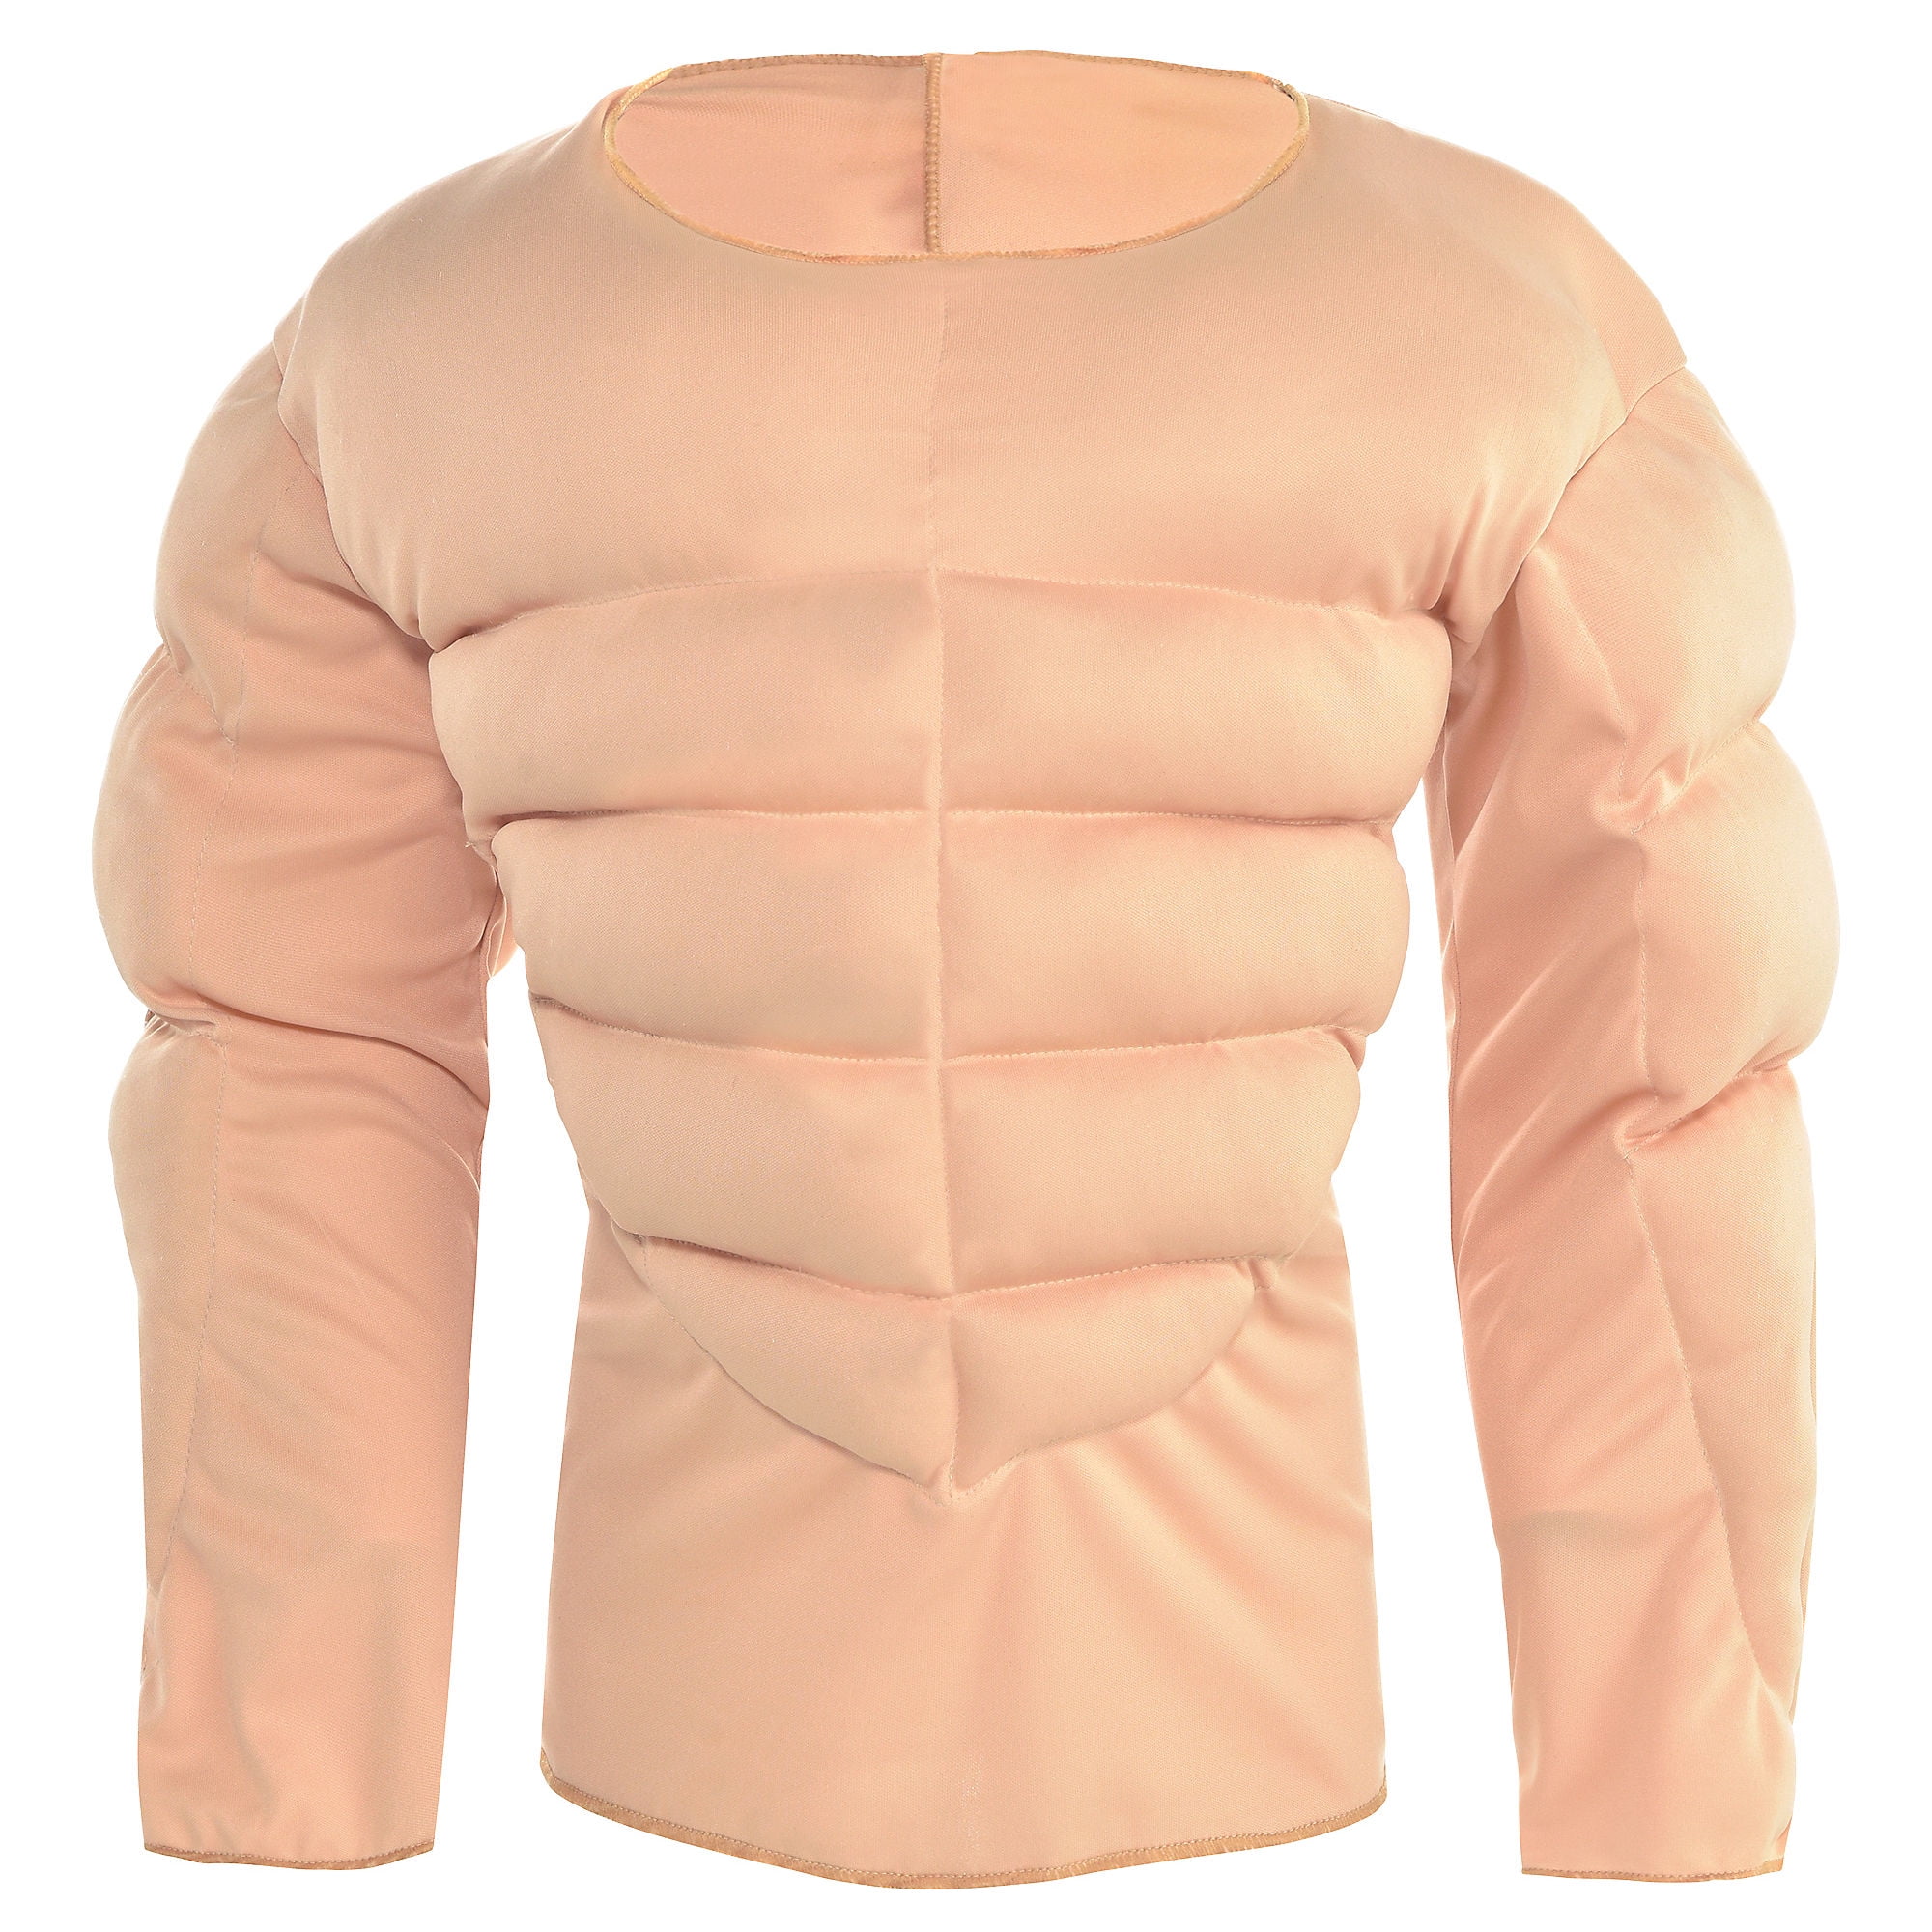 Padded Muscle Shirt - Adult Costume